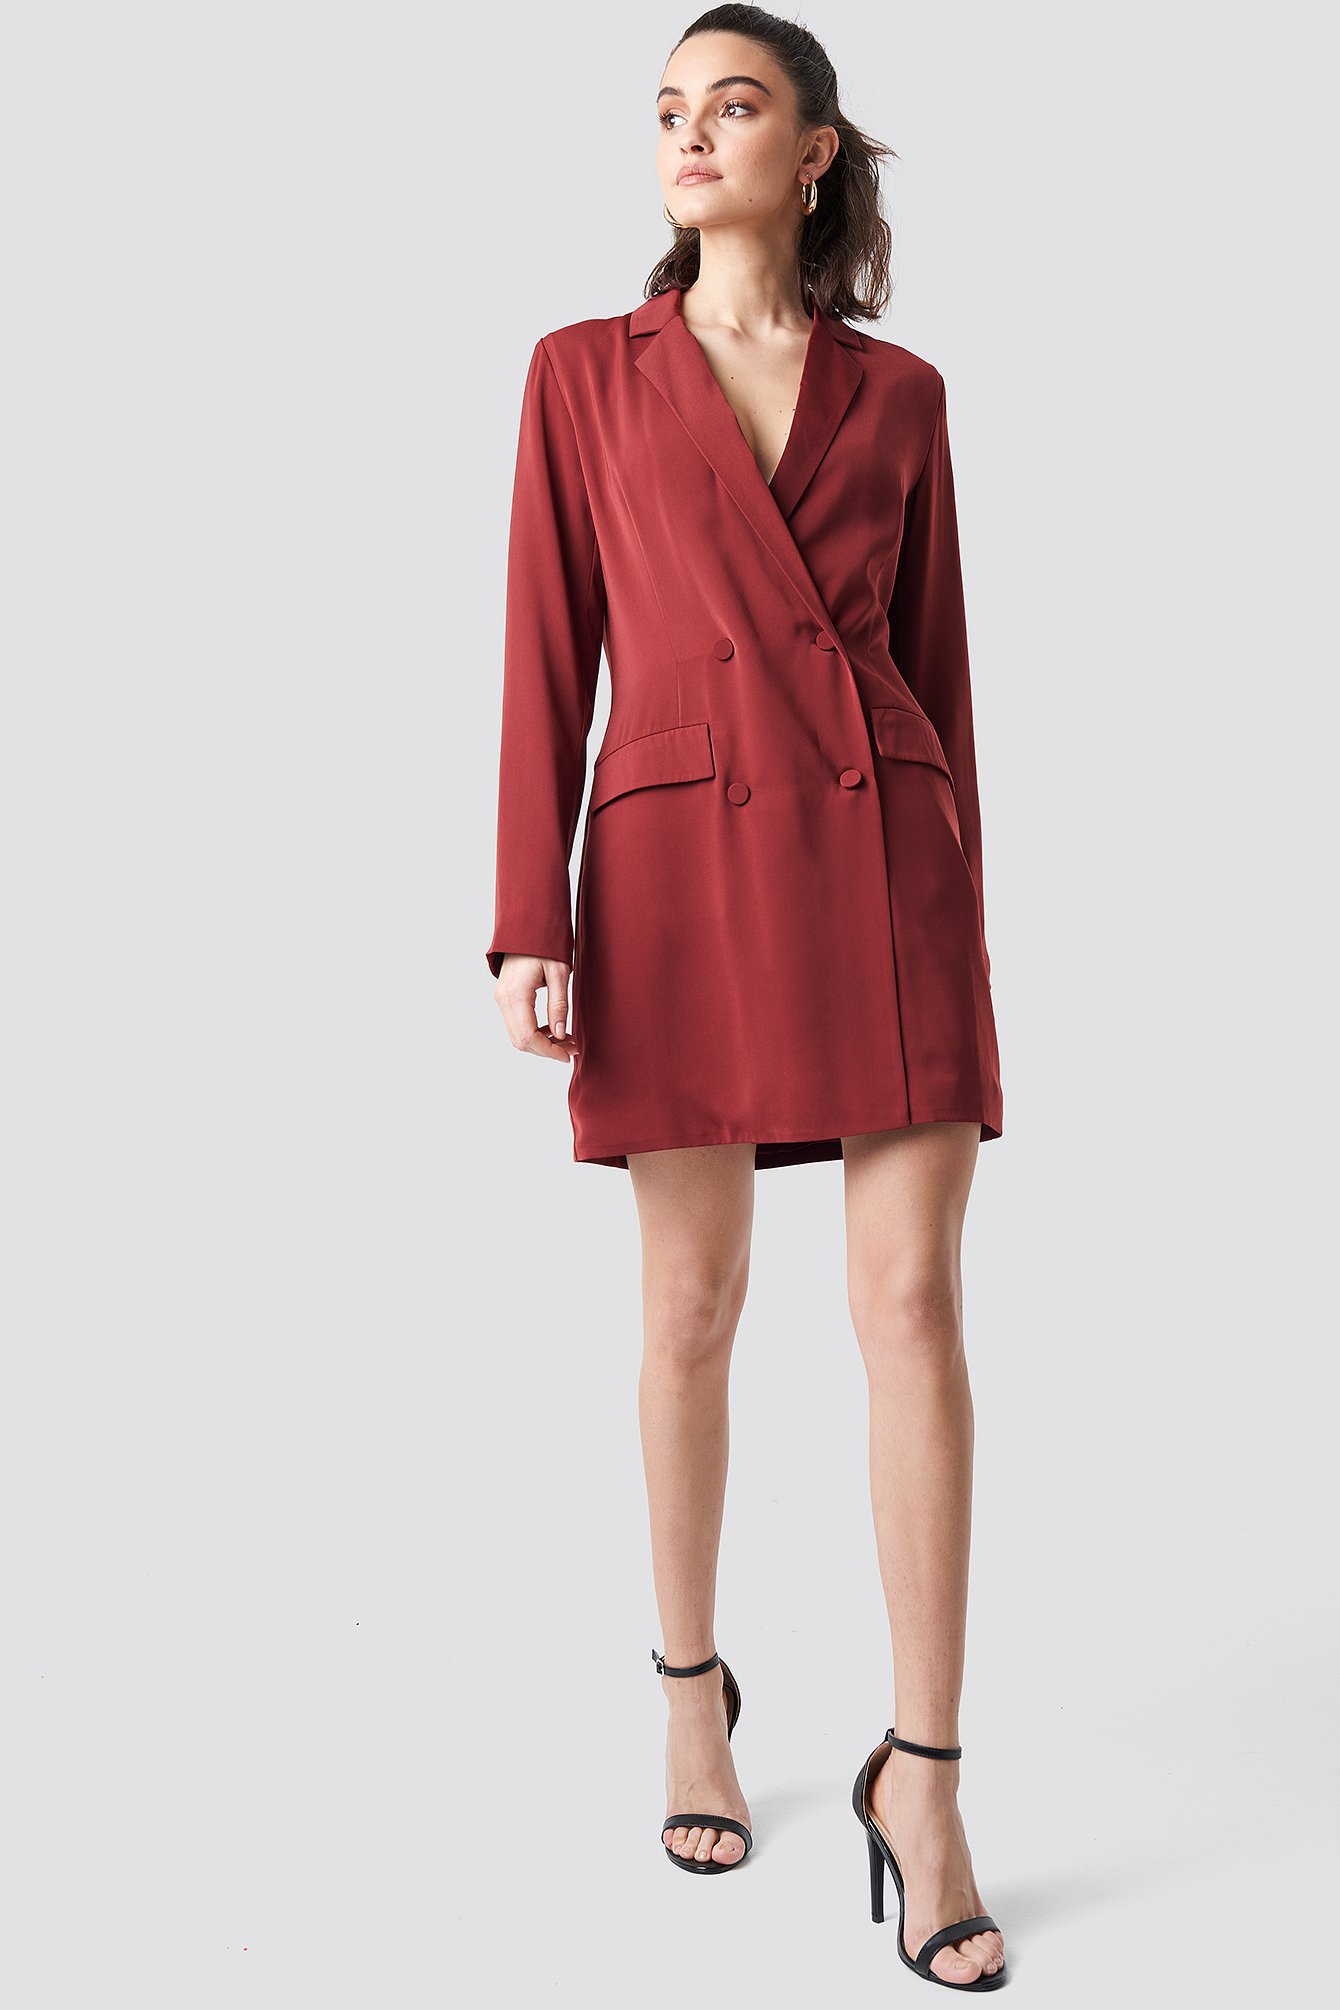 Na-kd Party Double Breasted Blazer Dress - Red Https://www.na-kd.com/poqcolorimages/red.png